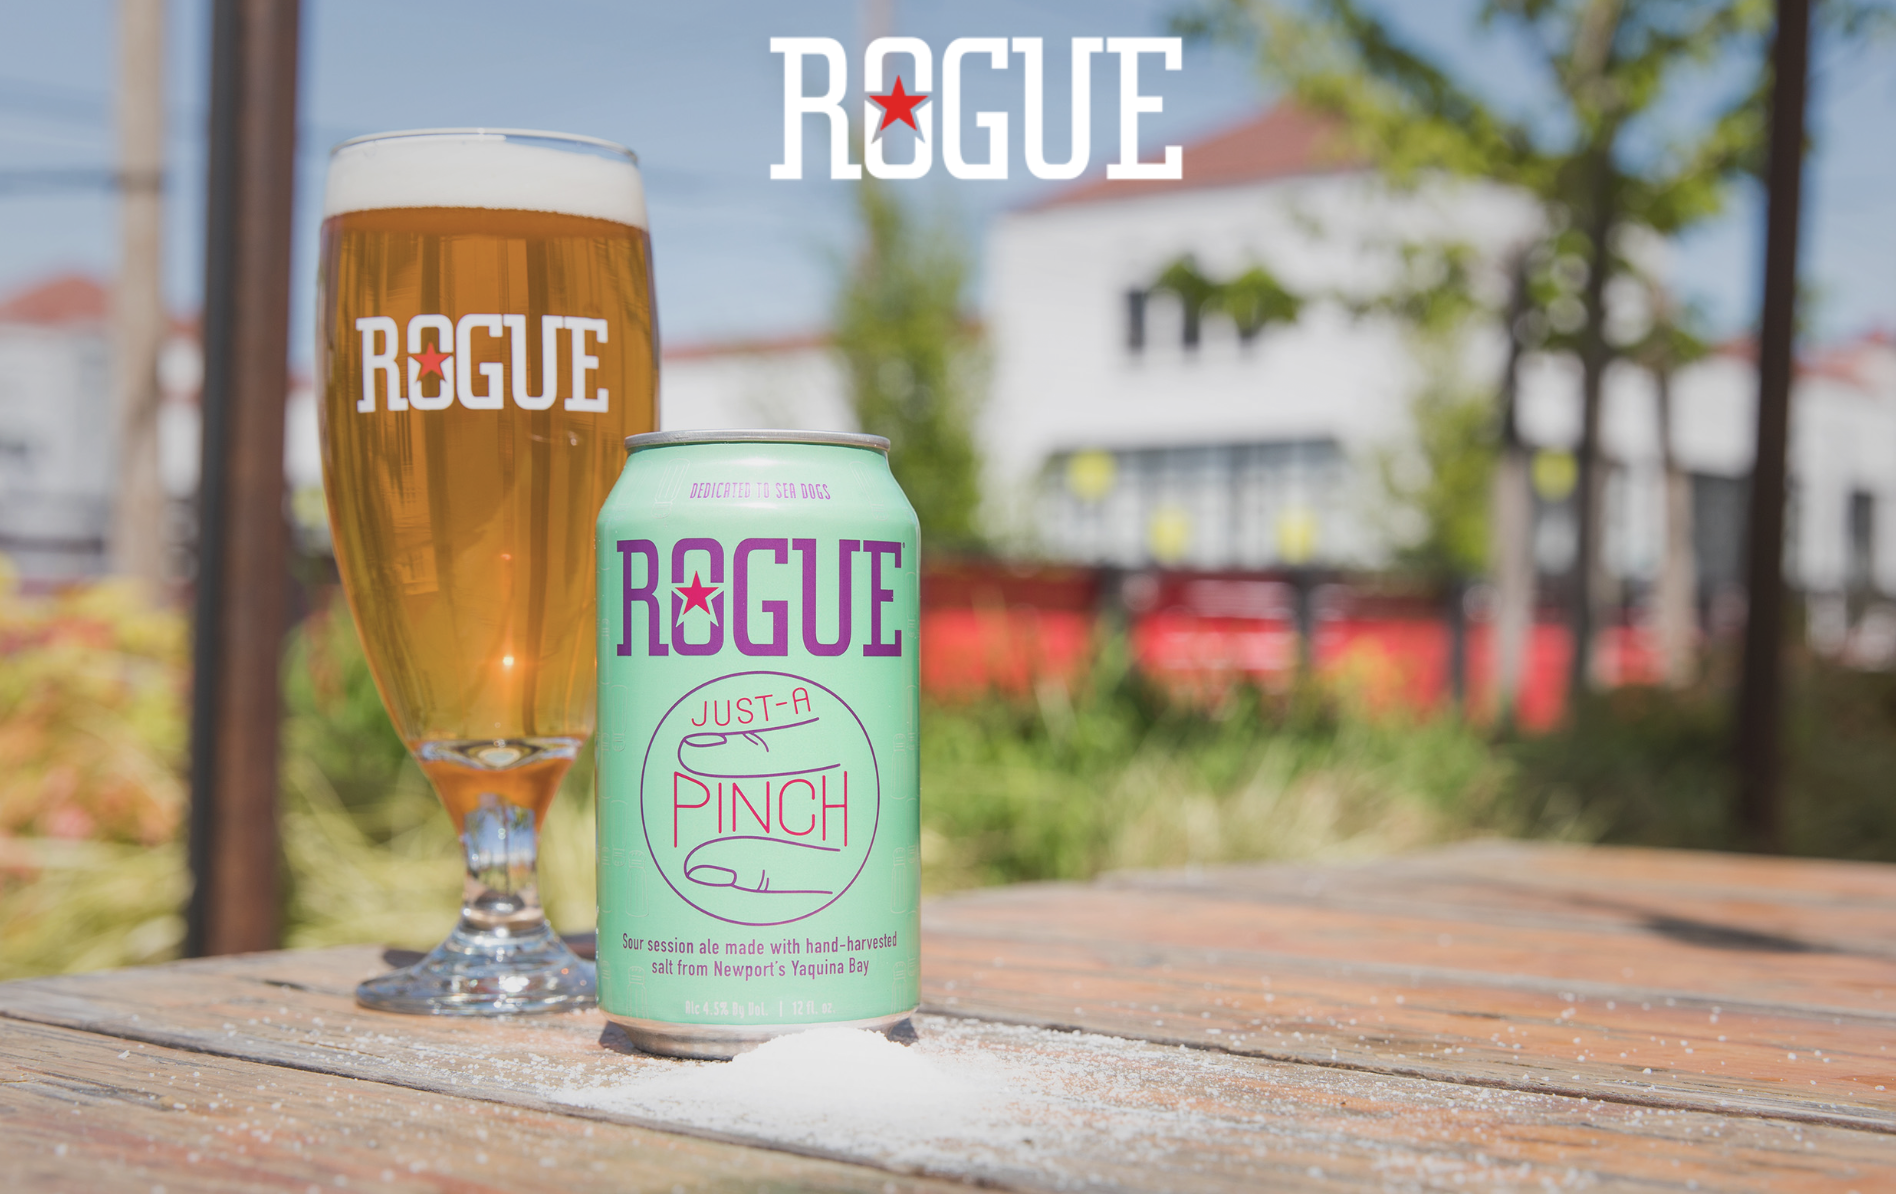 image of Just-A Pinch courtesy of Rouge Ales